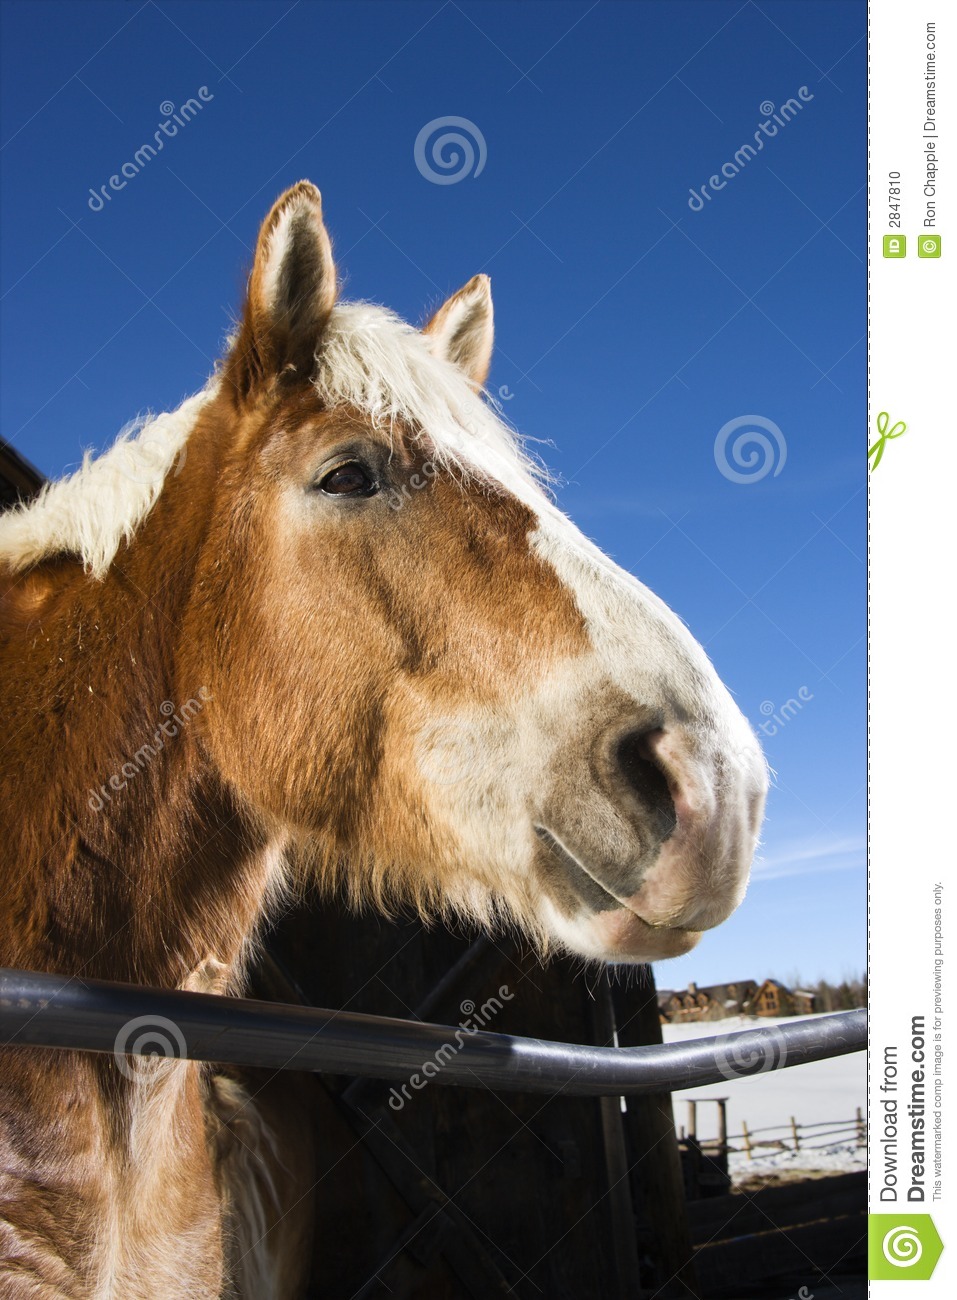 Draft Horse Leaning Over Ralling Of A Fence